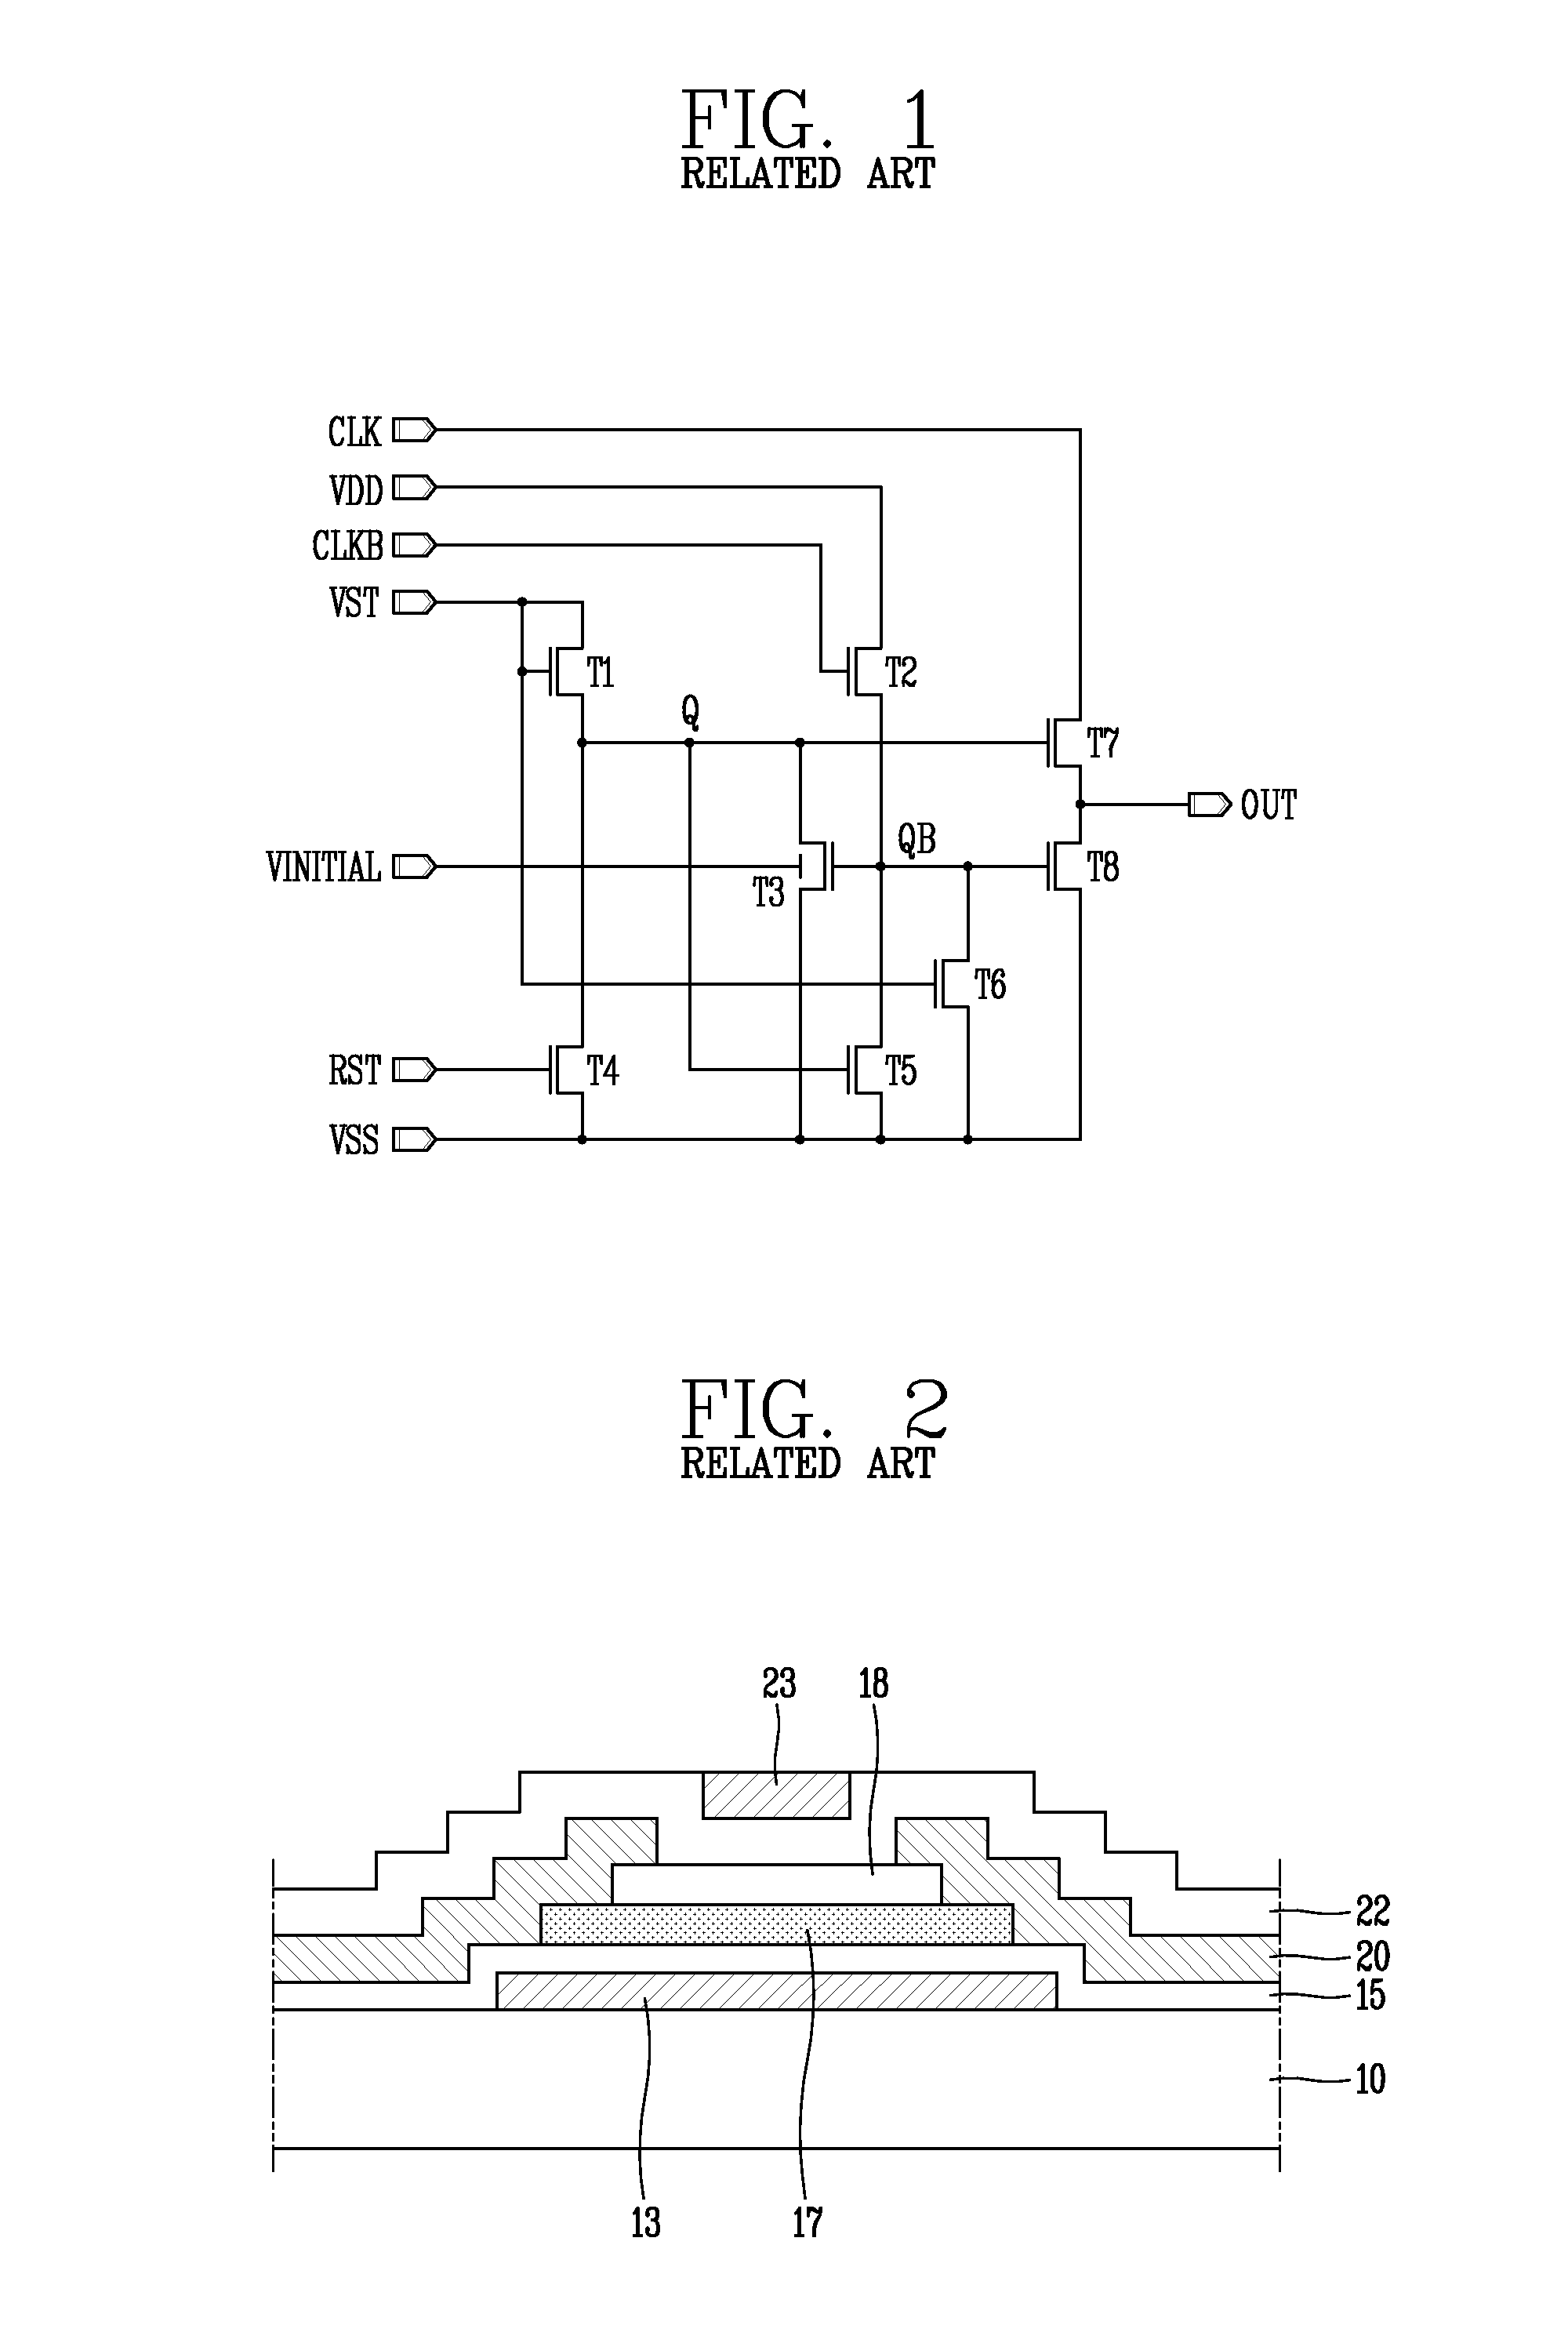 Substrate including oxide thin film transistor, method for fabricating the same, and driving circuit for liquid crystal display device using the same